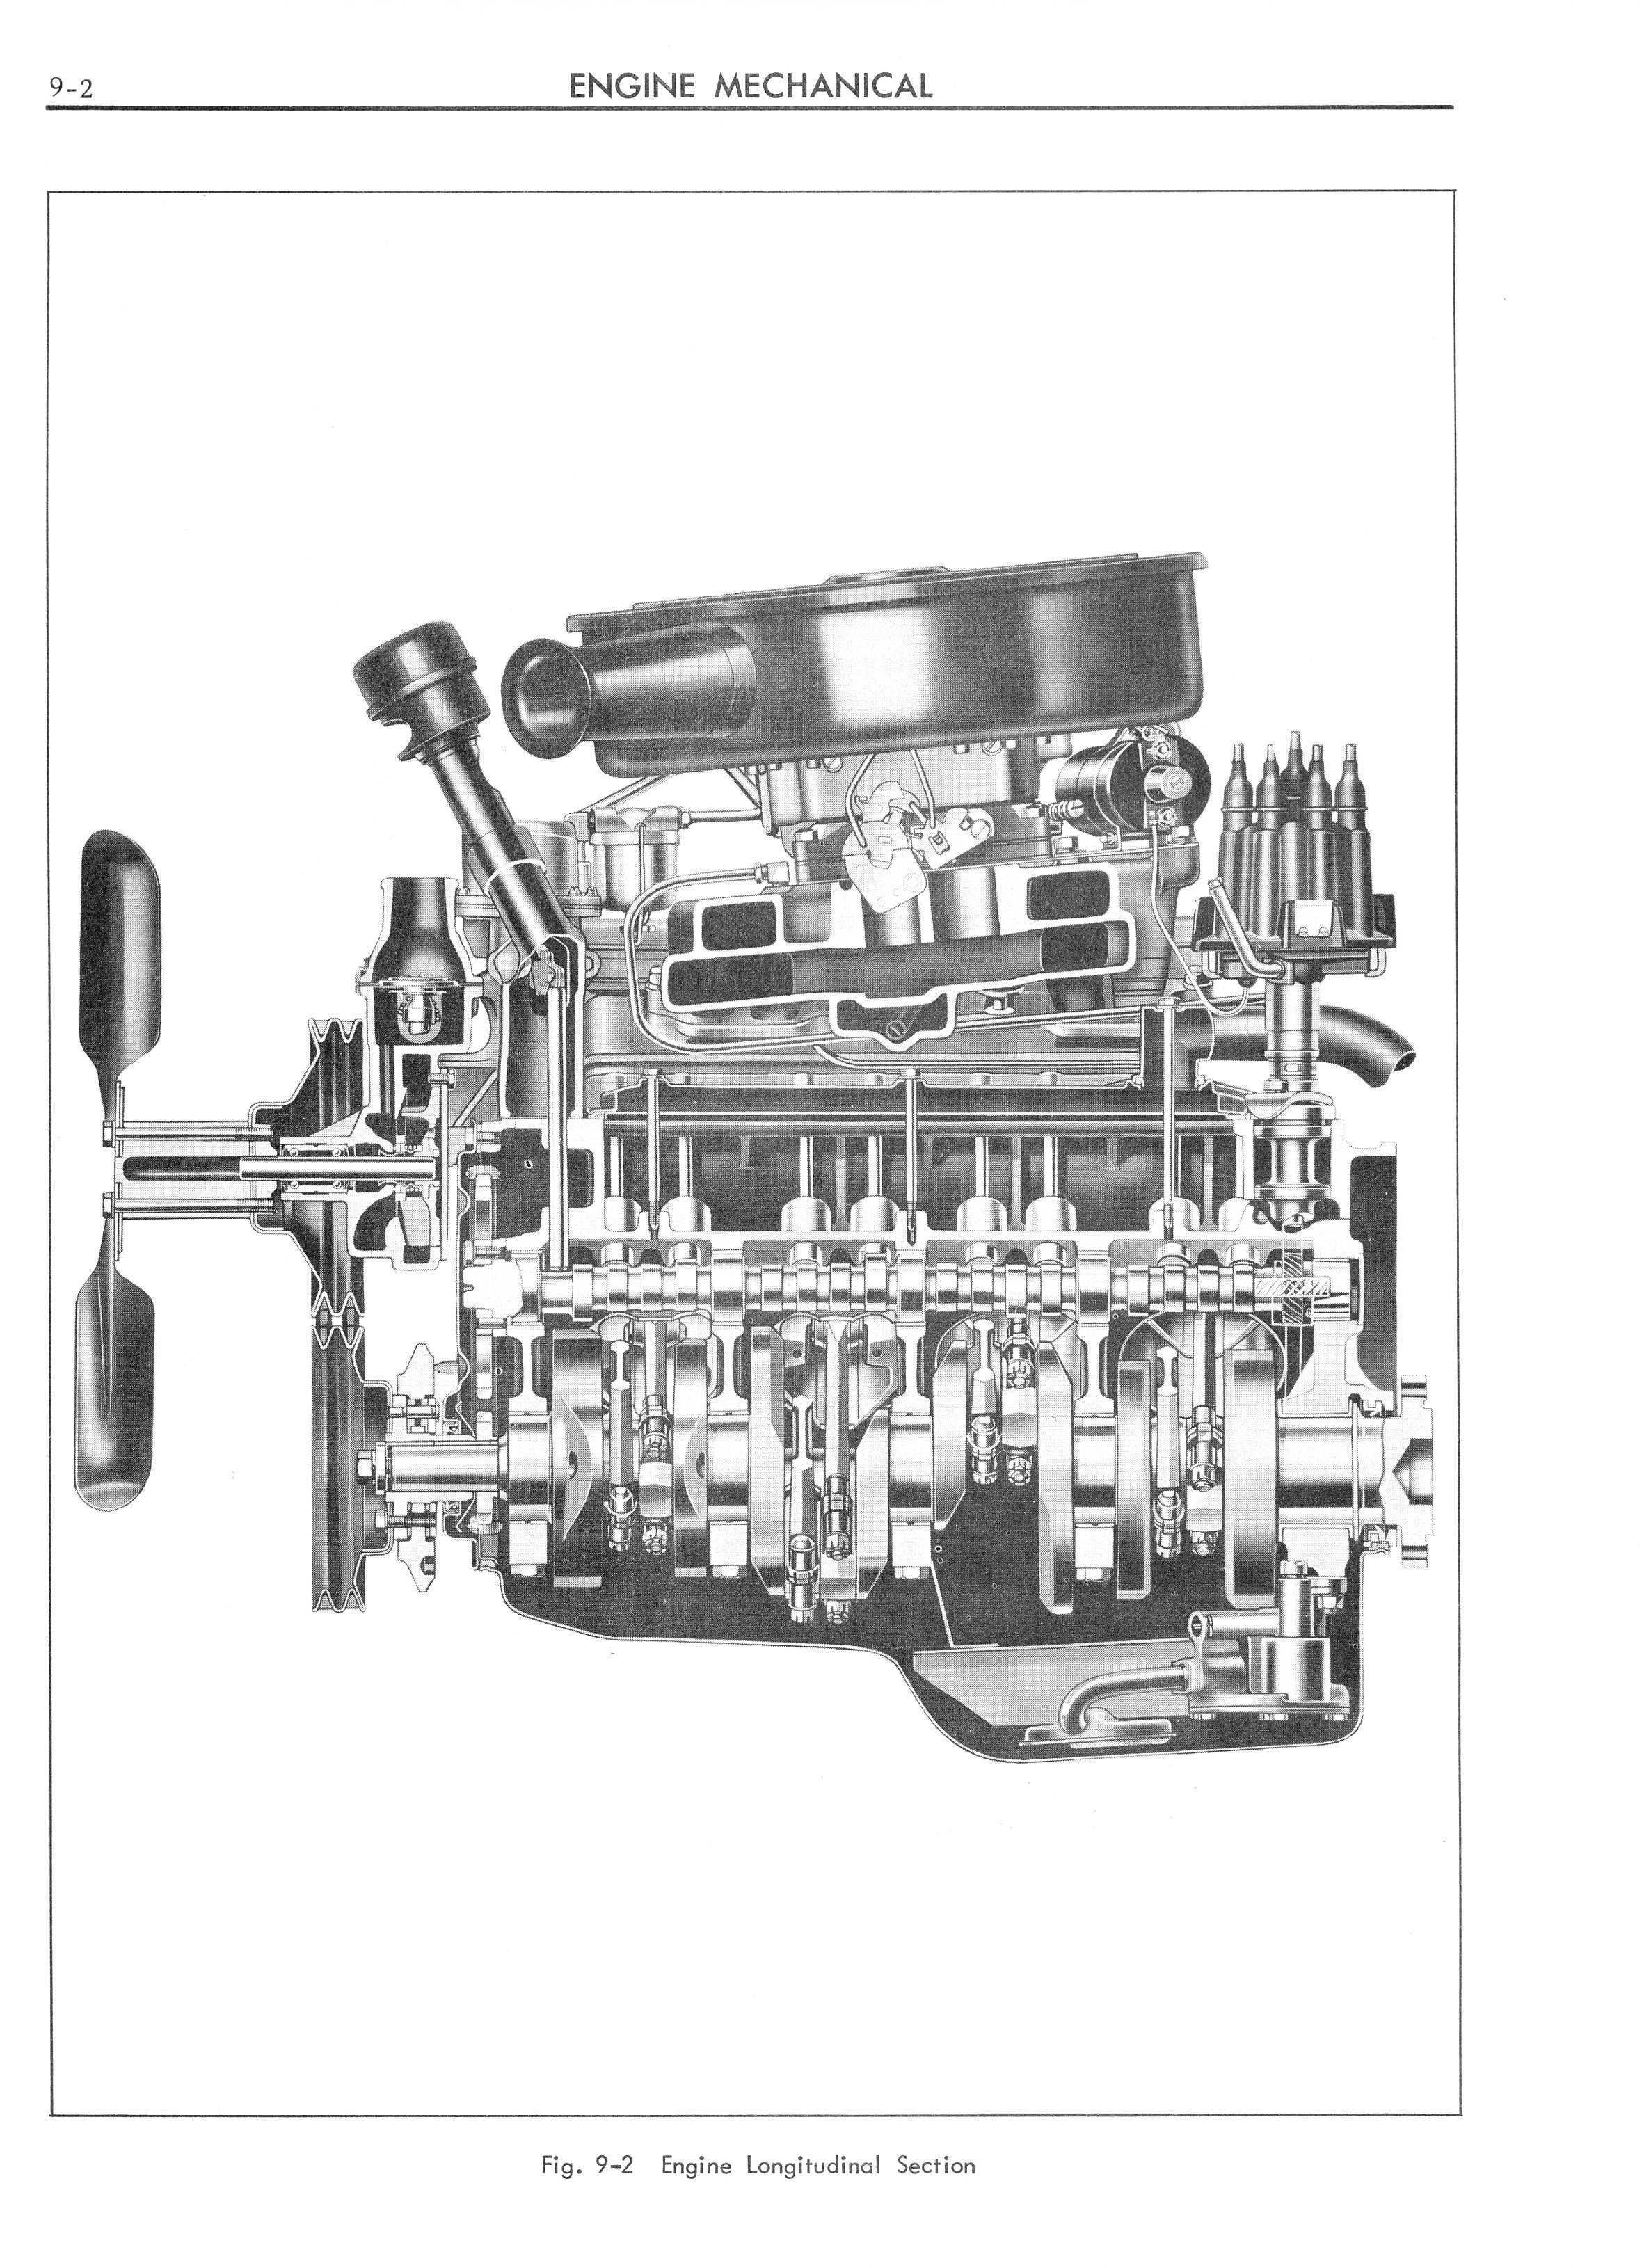 1962 Cadillac Shop Manual - Engine Mechanical Page 2 of 32